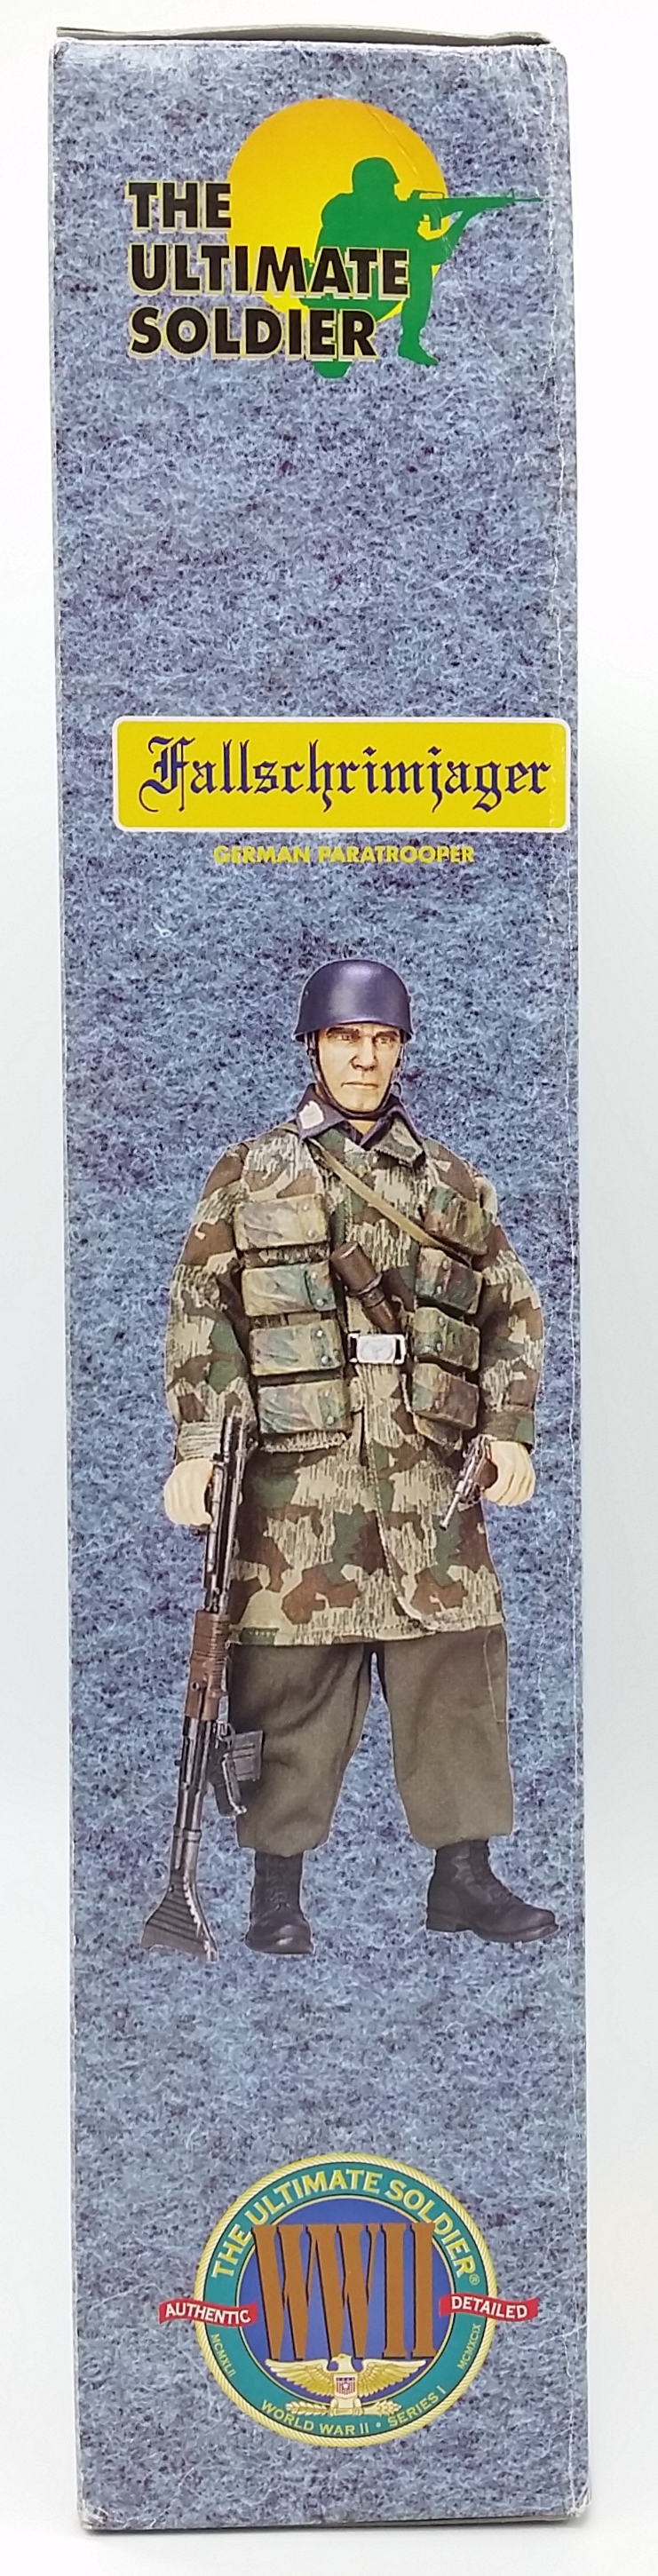 Ultimate Soldier WWII Series Fallschrimiager German Paratrooper 